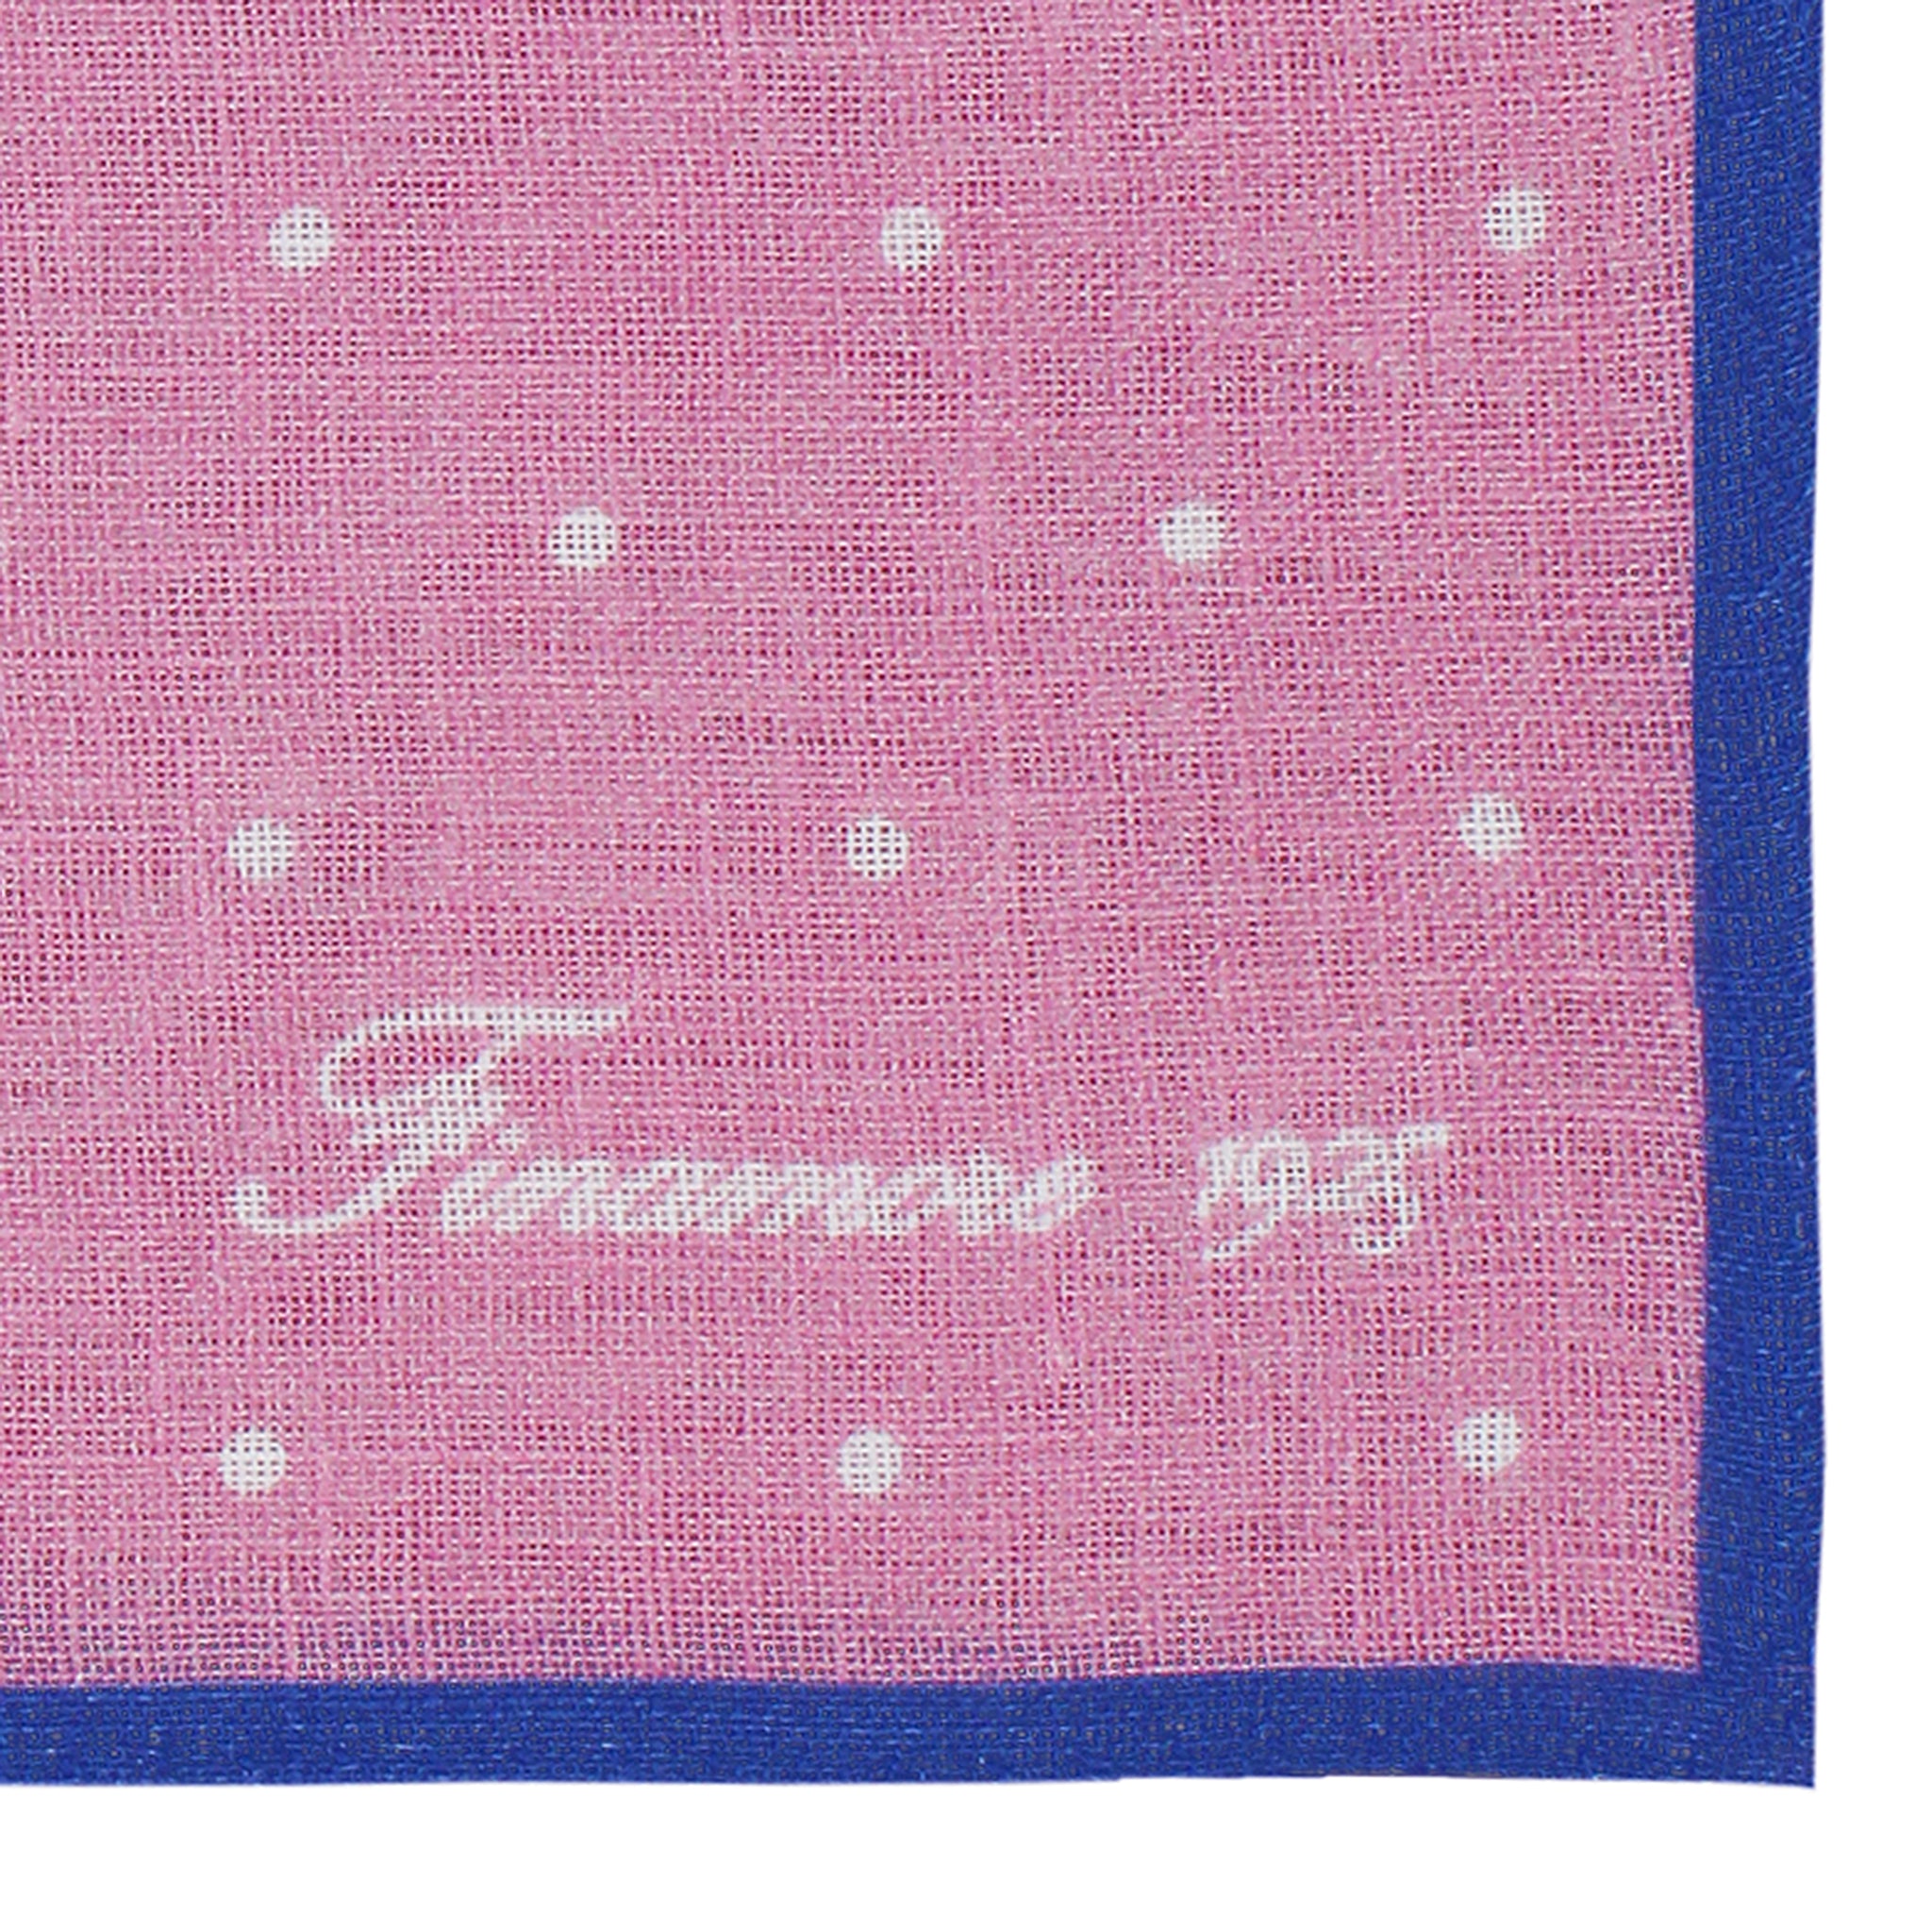 Linen pocket square with pink background and blue border